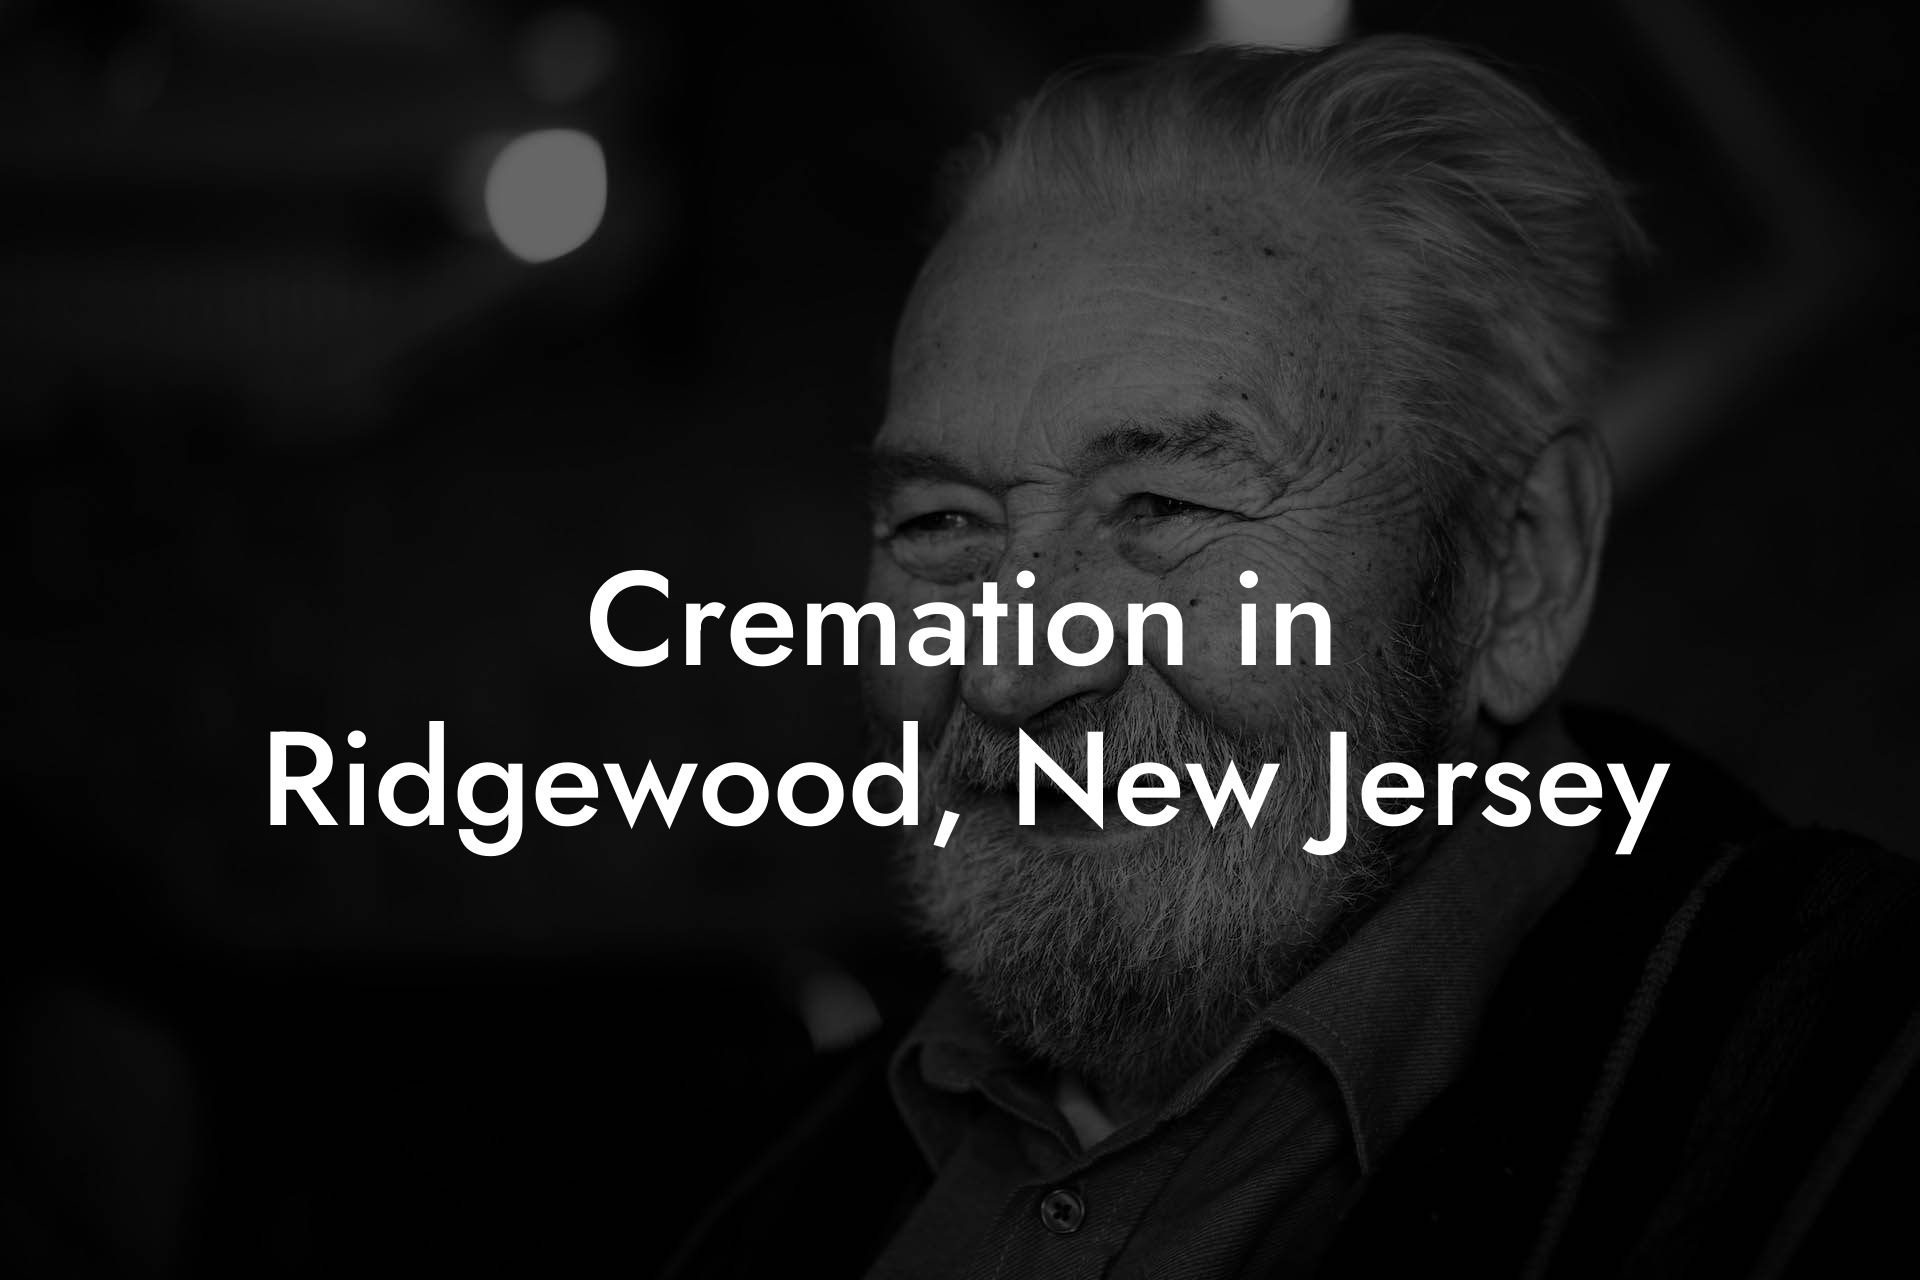 Cremation in Ridgewood, New Jersey